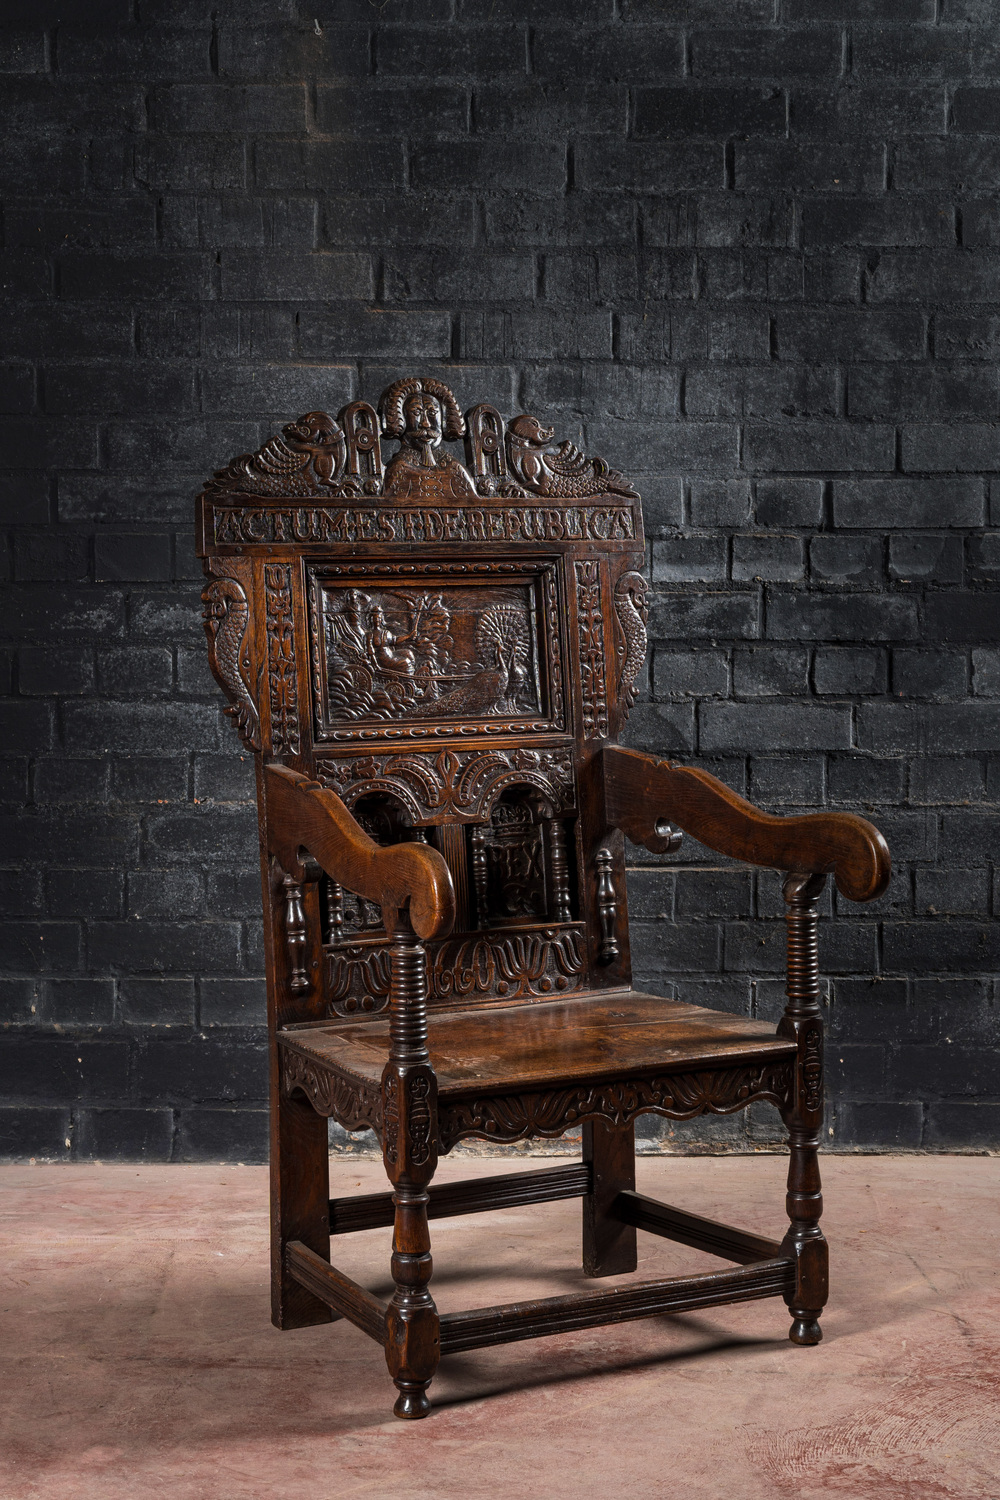 A 17th C.-style English oak Wainscot chair with Juno in her carriage drawn by peacocks, 19th C.